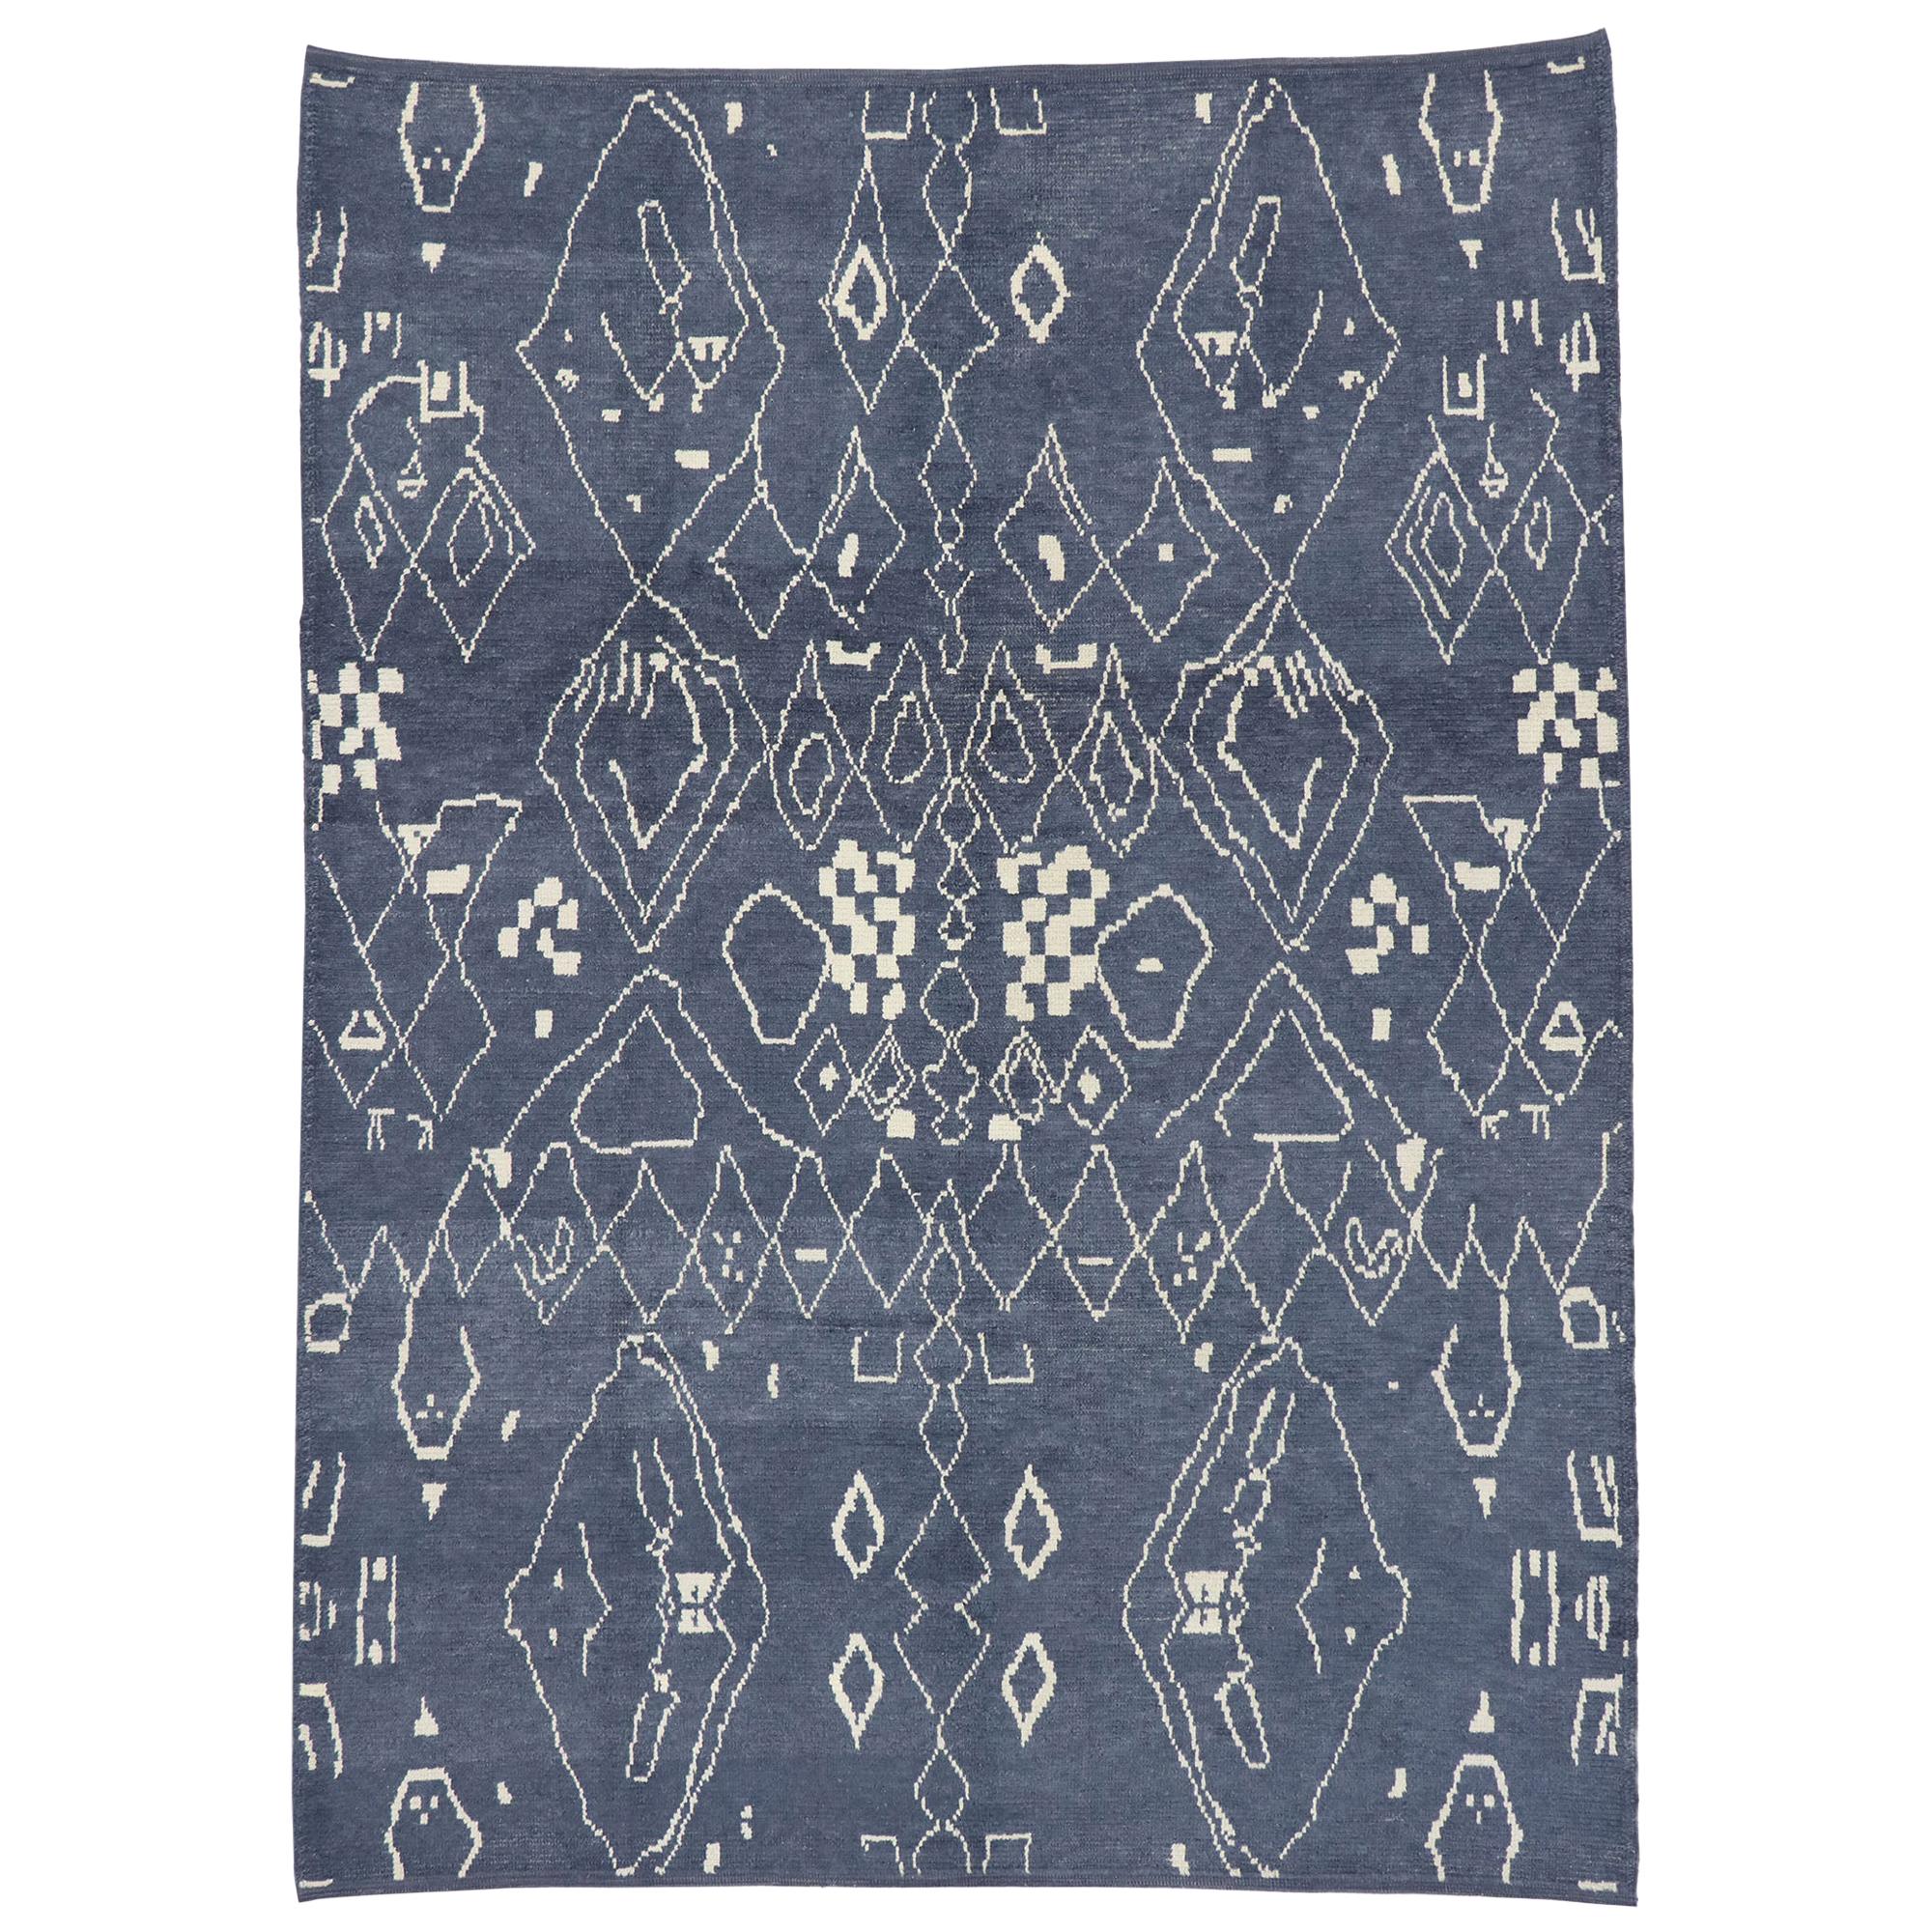 New Contemporary Moroccan Style Rug with Tribal Design